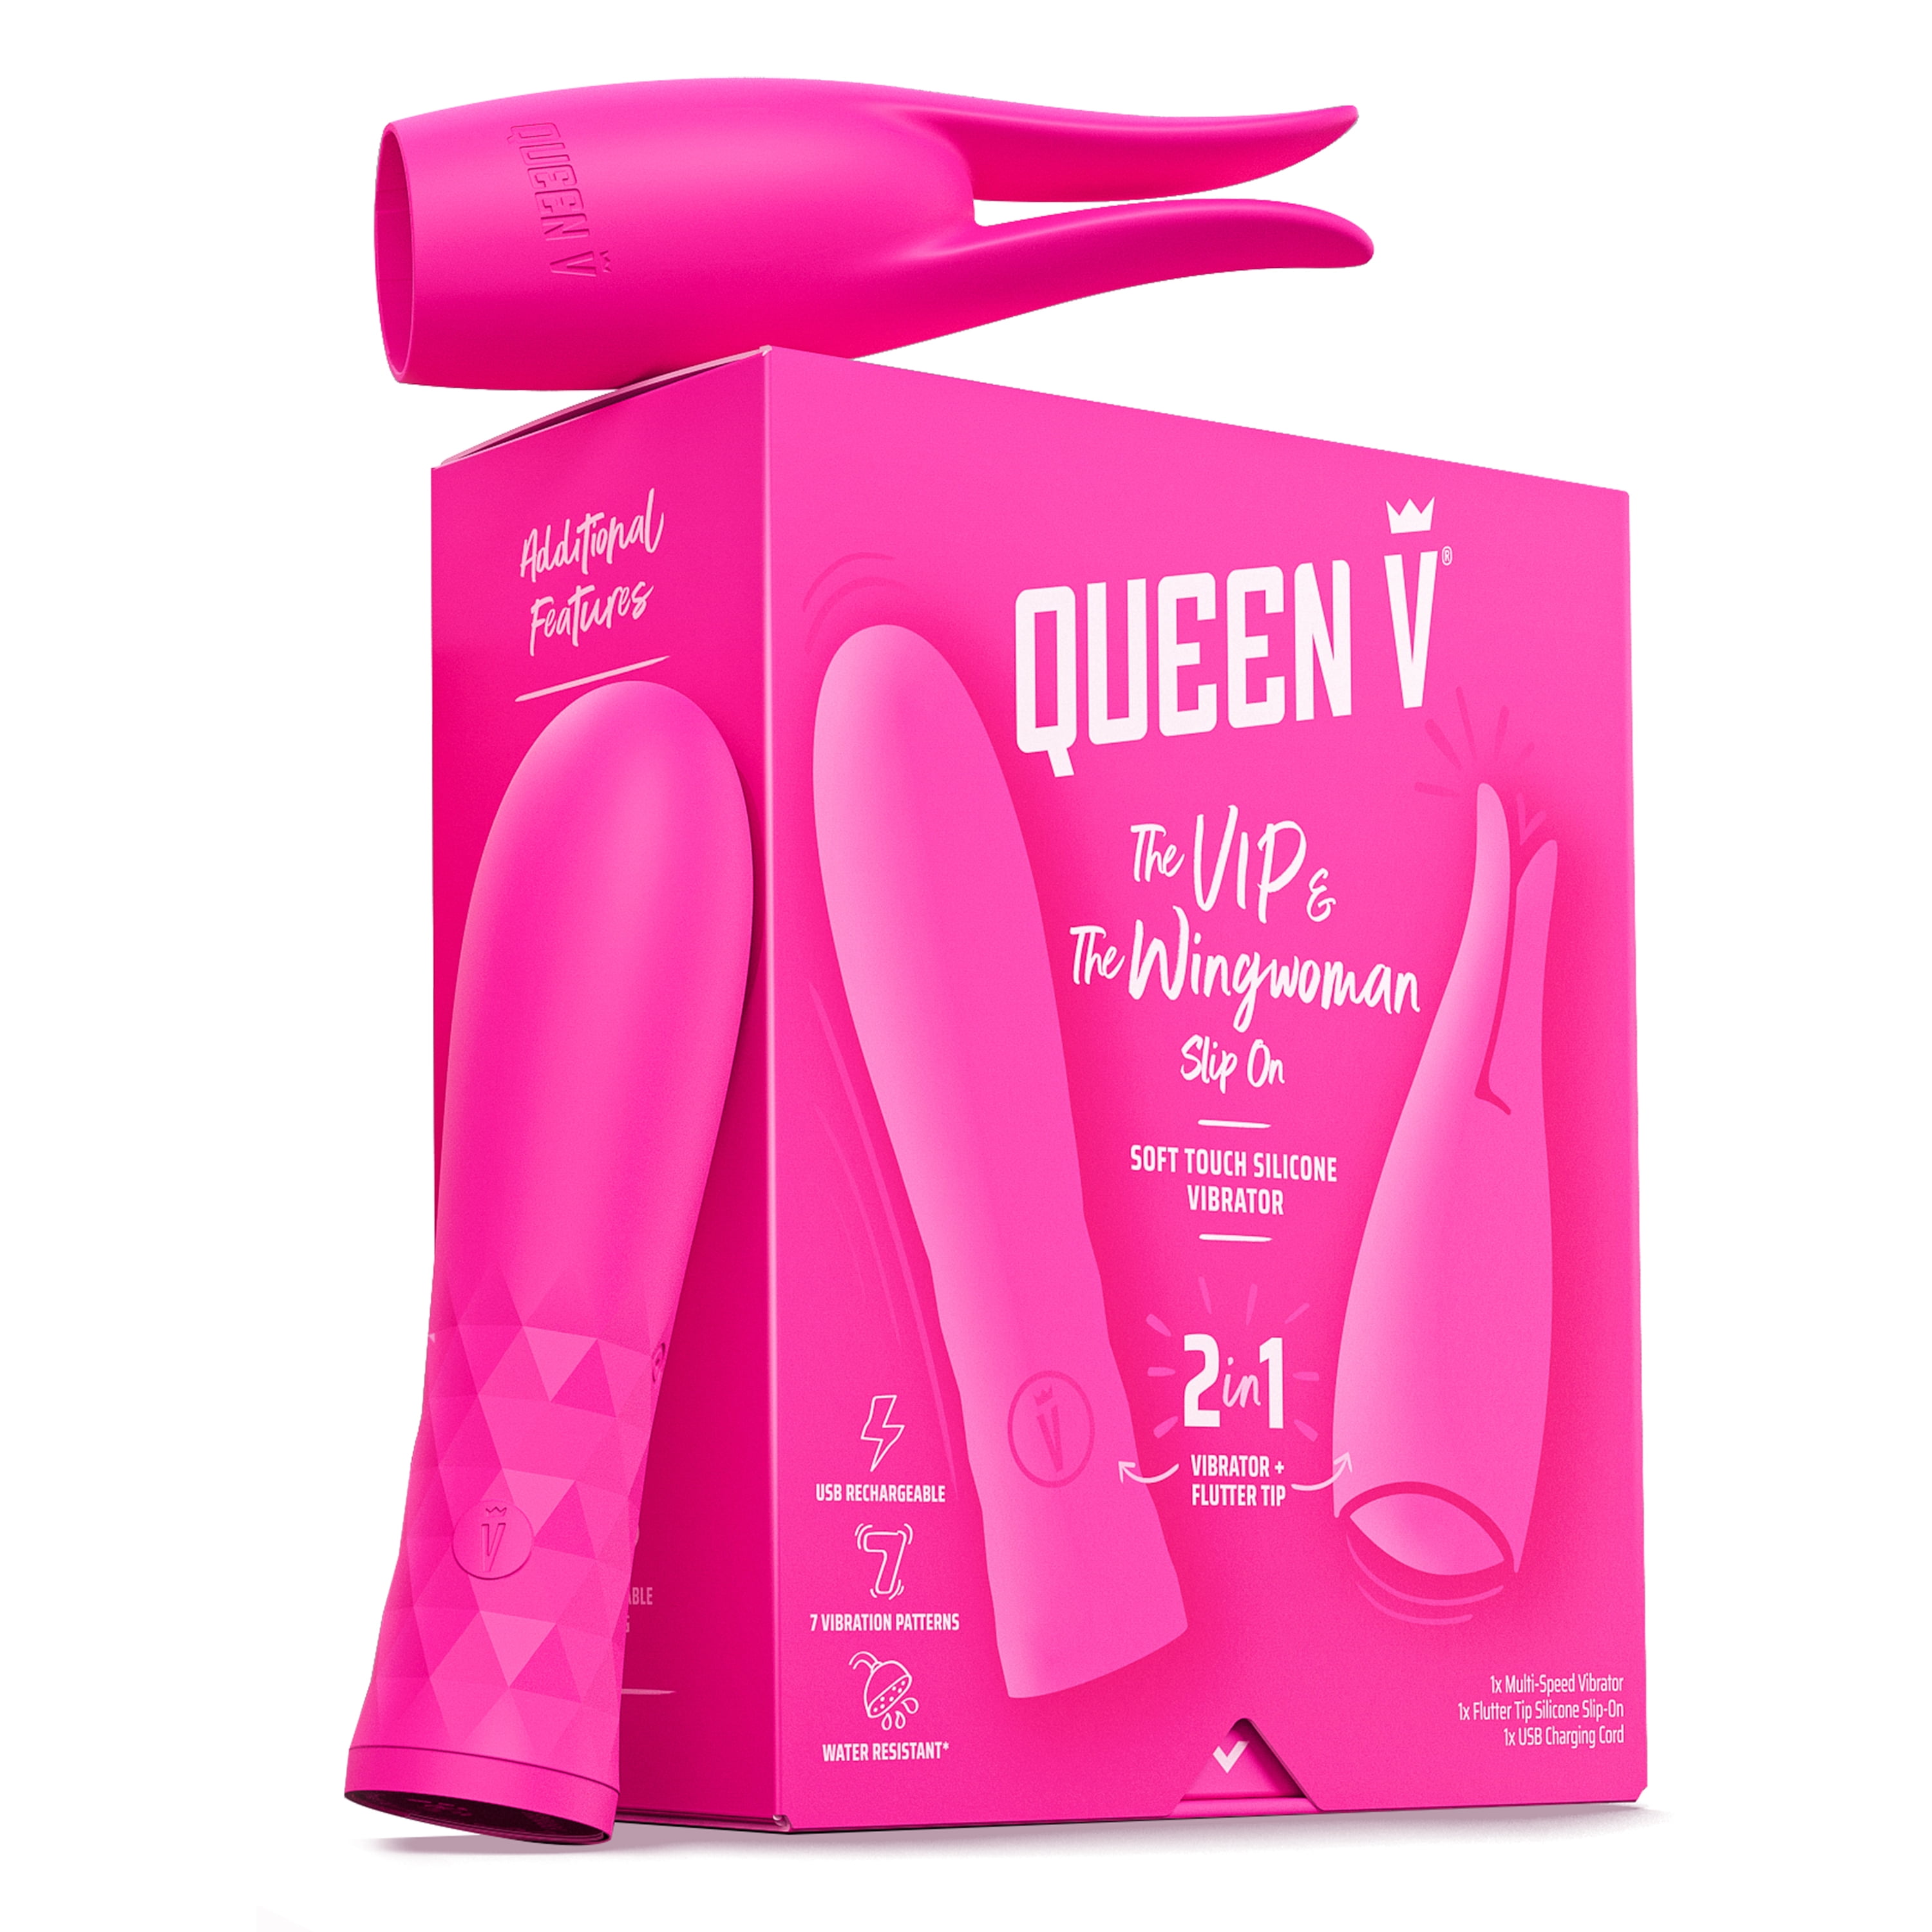 Queen V The VIP and The Wingwoman Slip On, Adult Sex Toy for Woman, 2 in 1 Multi-Speed Vibrator + Flutter Tip Slip On, USB Rechargeable, Water Resistant, Soft Touch Silicone Personal pic photo